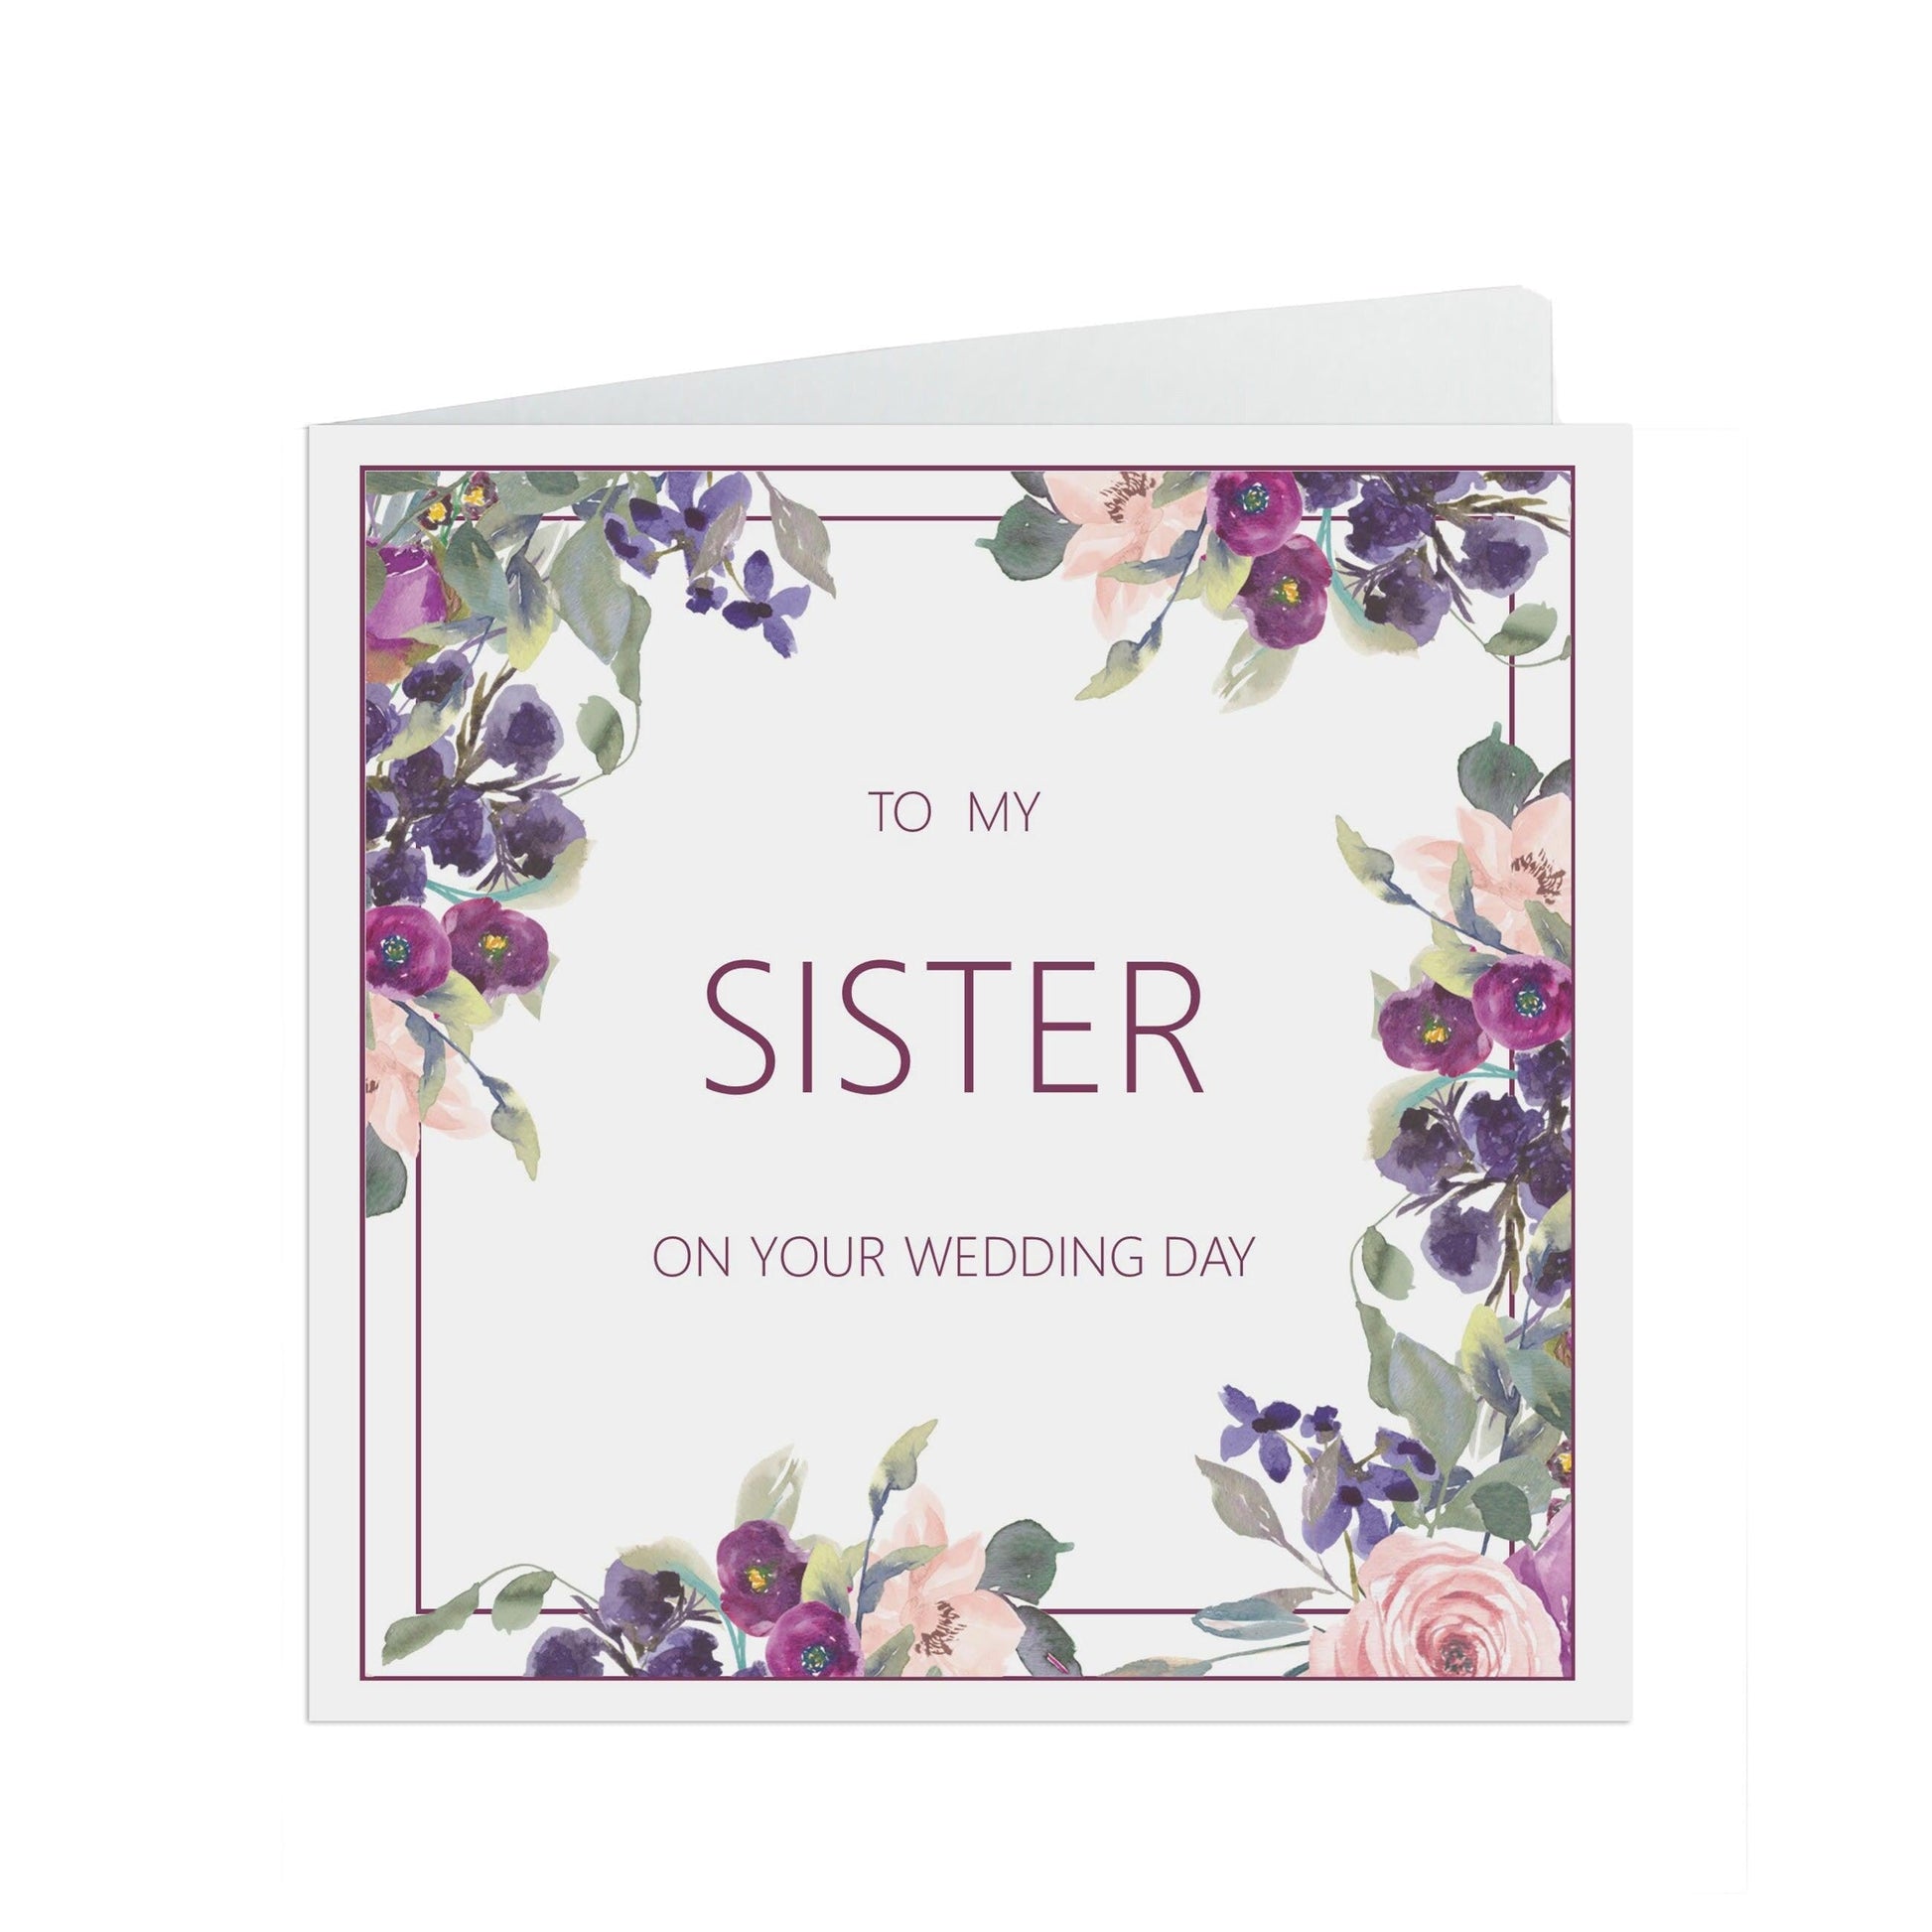  Sister Wedding Day Card, Purple Floral 6x6 Inches With A Kraft Envelope by PMPRINTED 